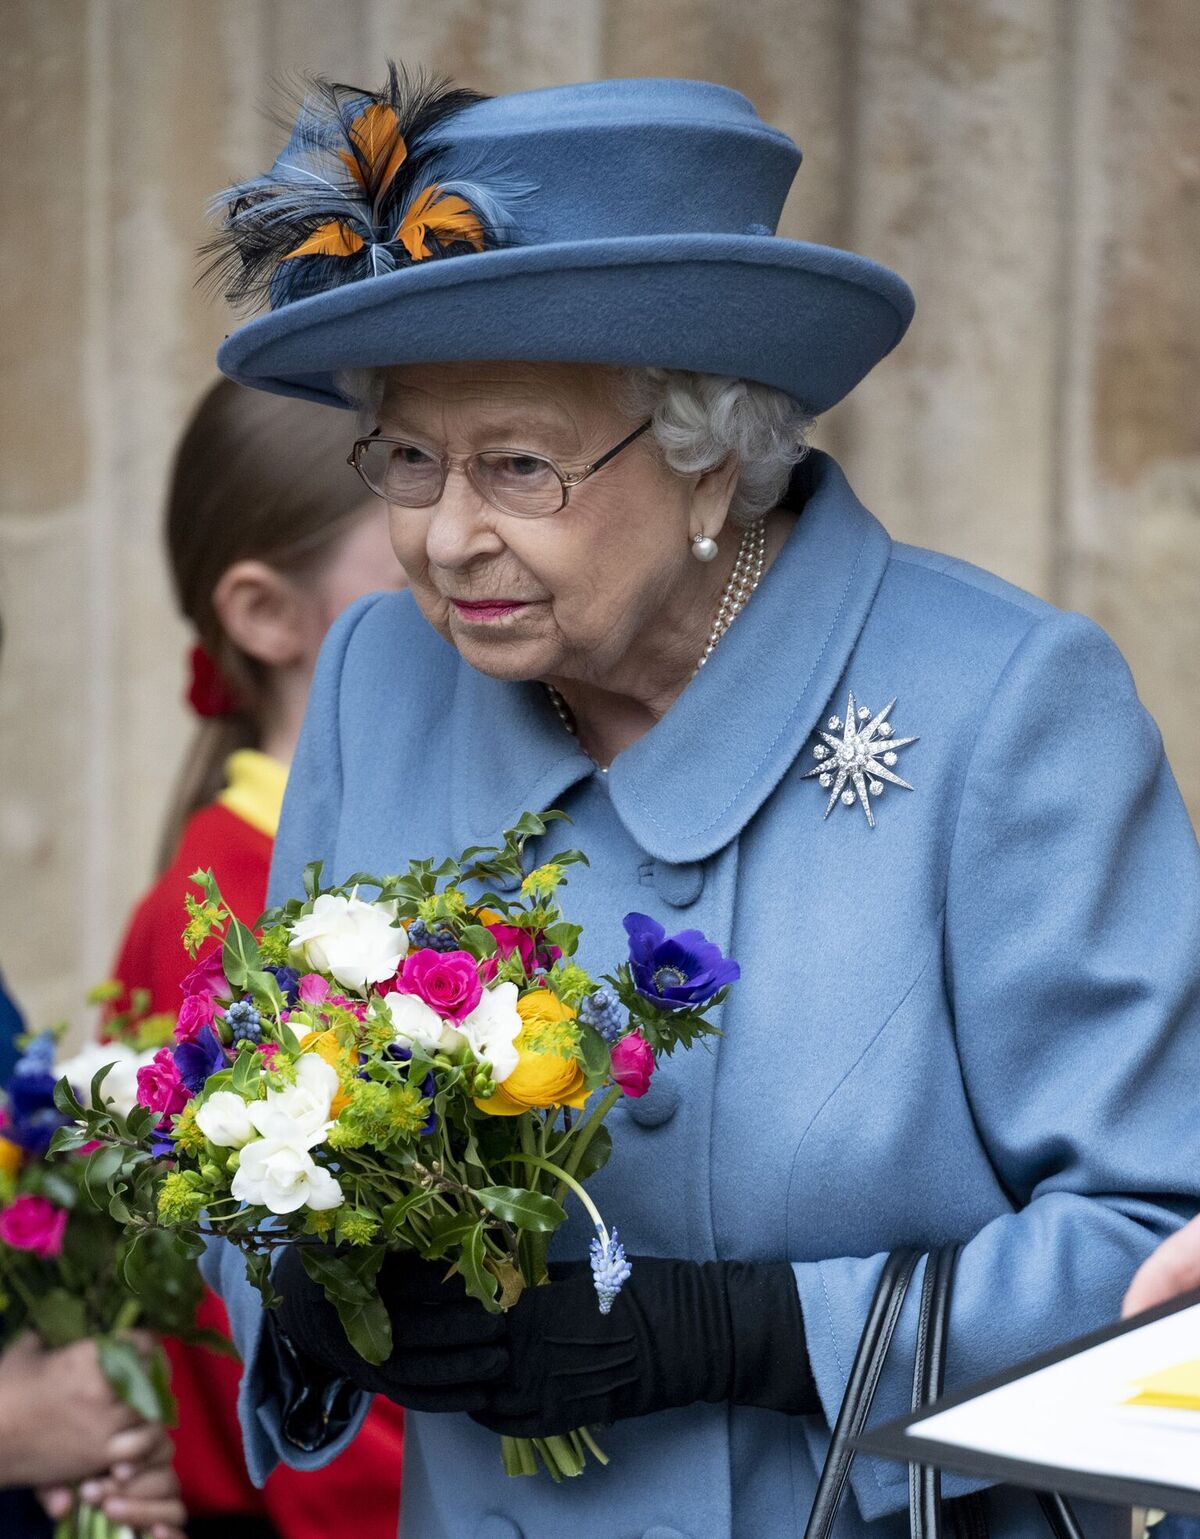 Queen Elizabeth II at the Commonwealth Day Service held at Westminster Abbey on March 9, 2020, in London, England | Photo: Mark Cuthbert/UK Press/Getty Images